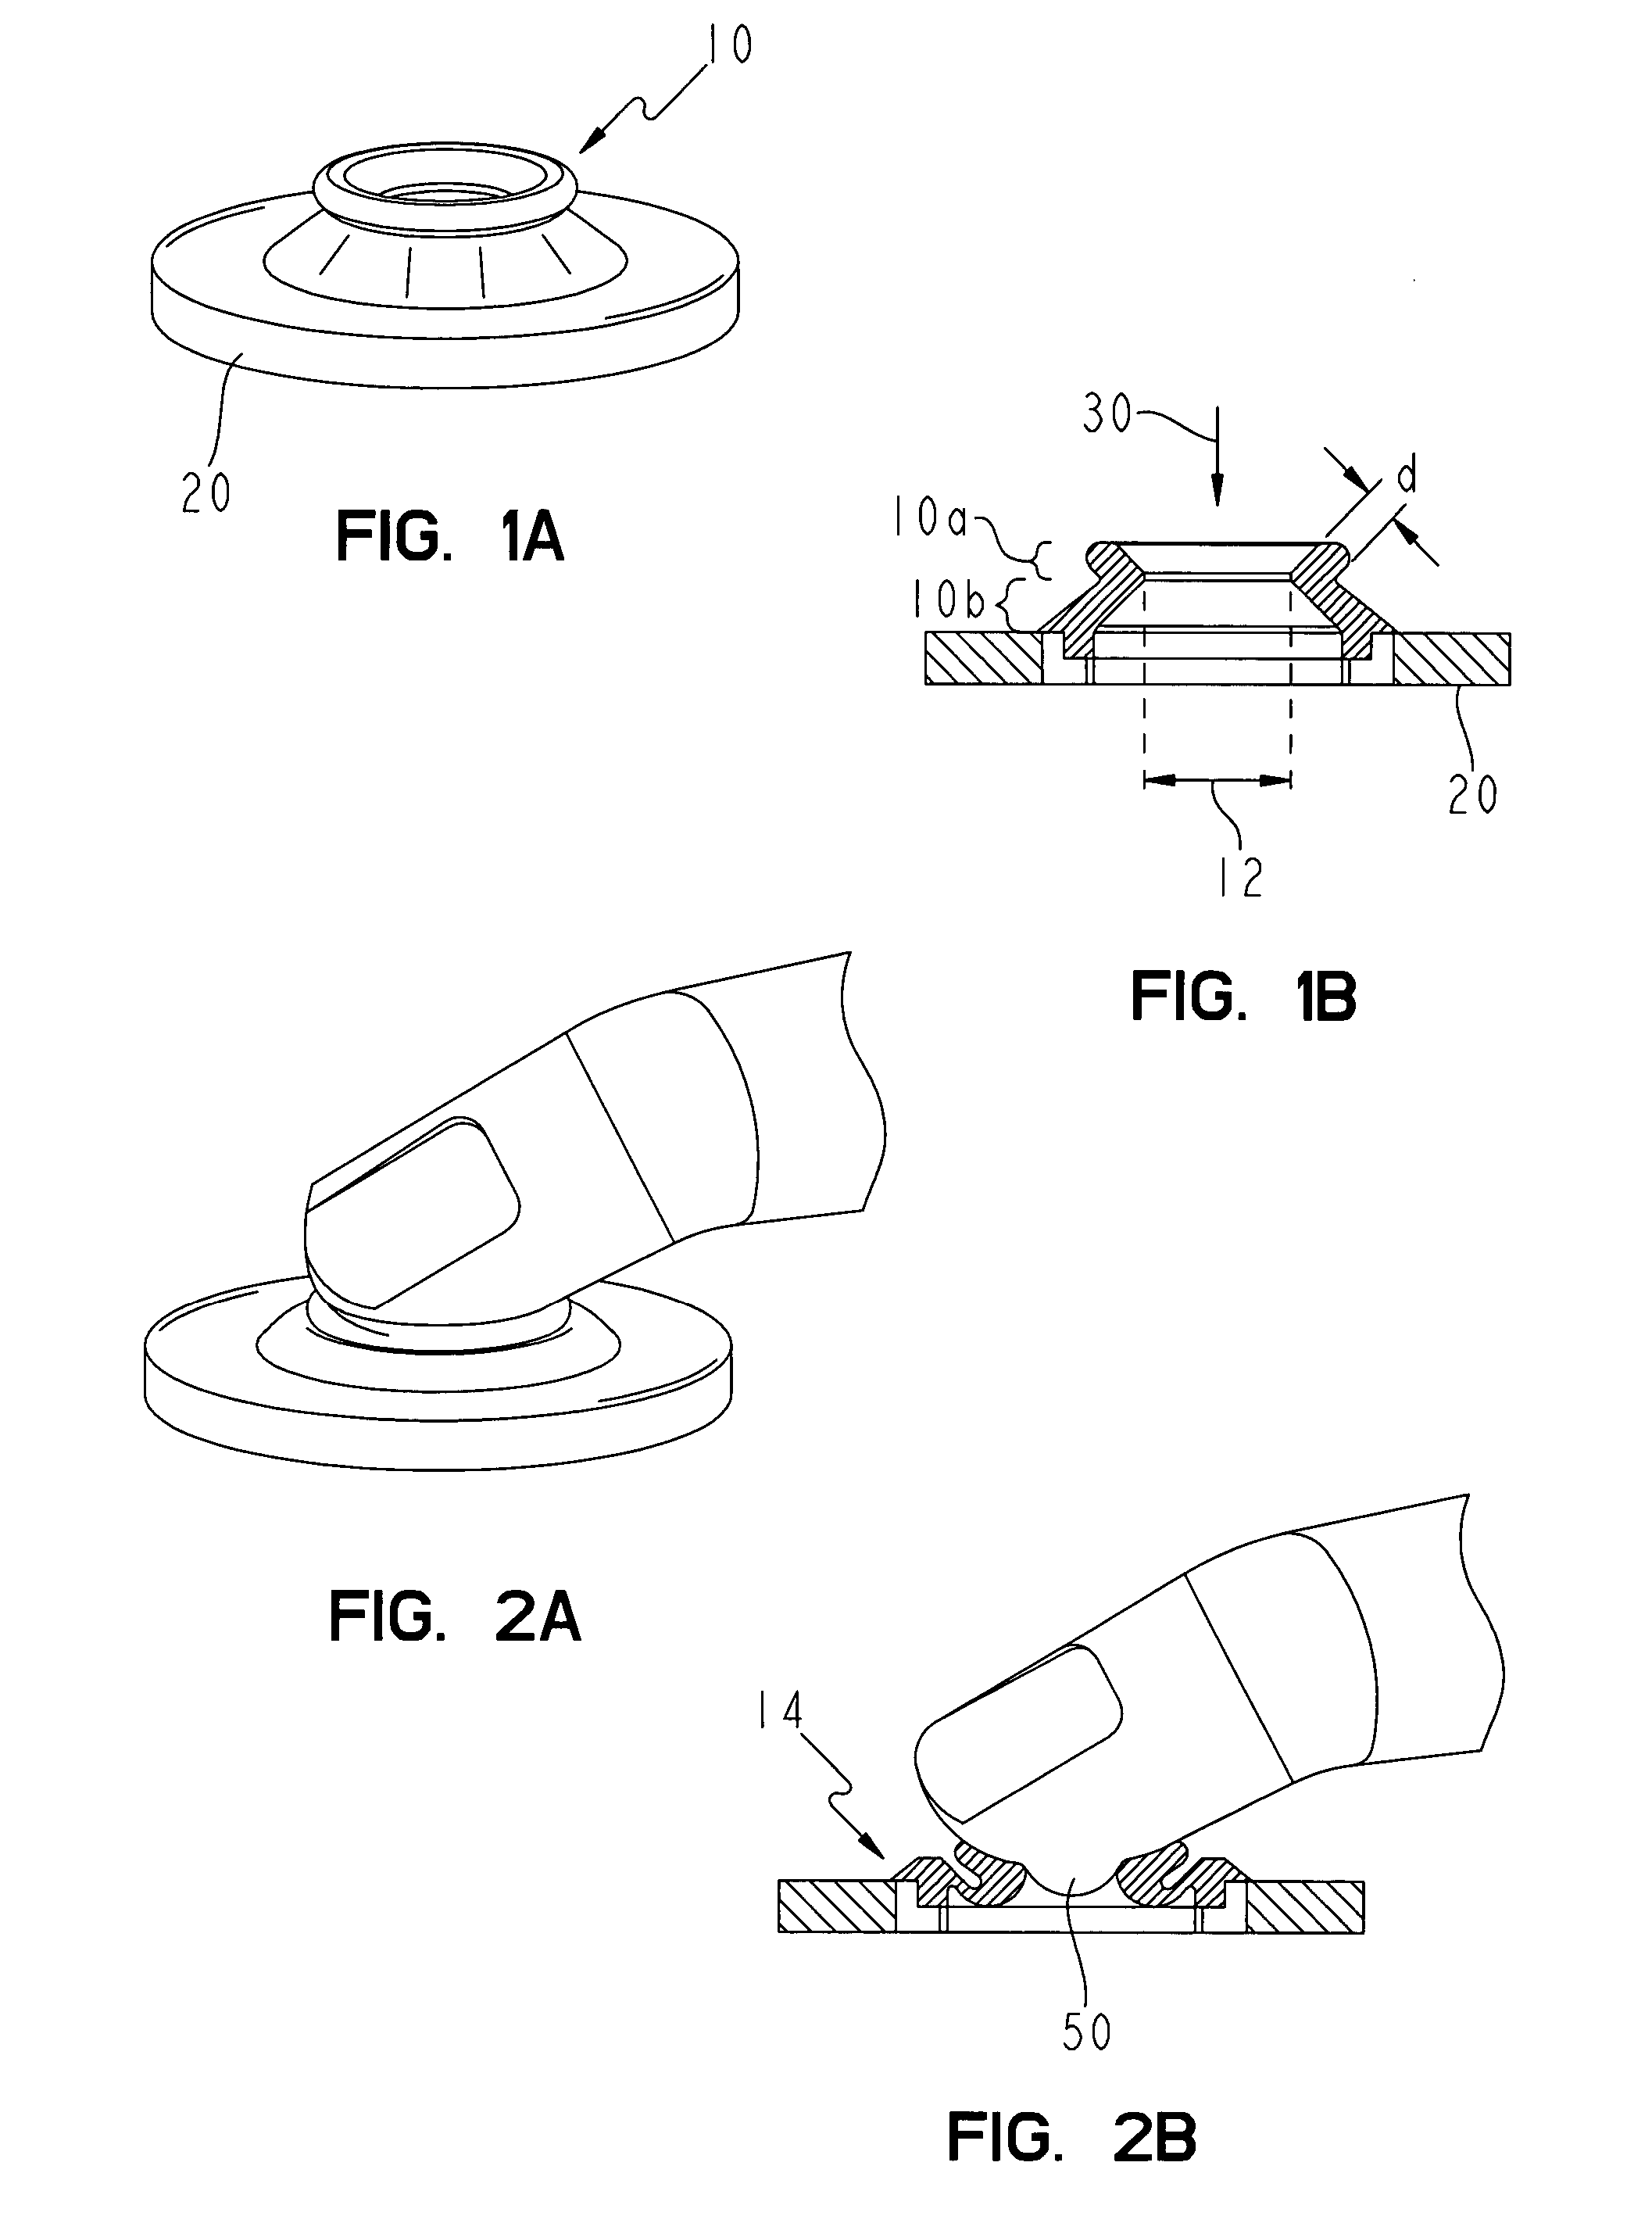 System for withdrawing body fluid